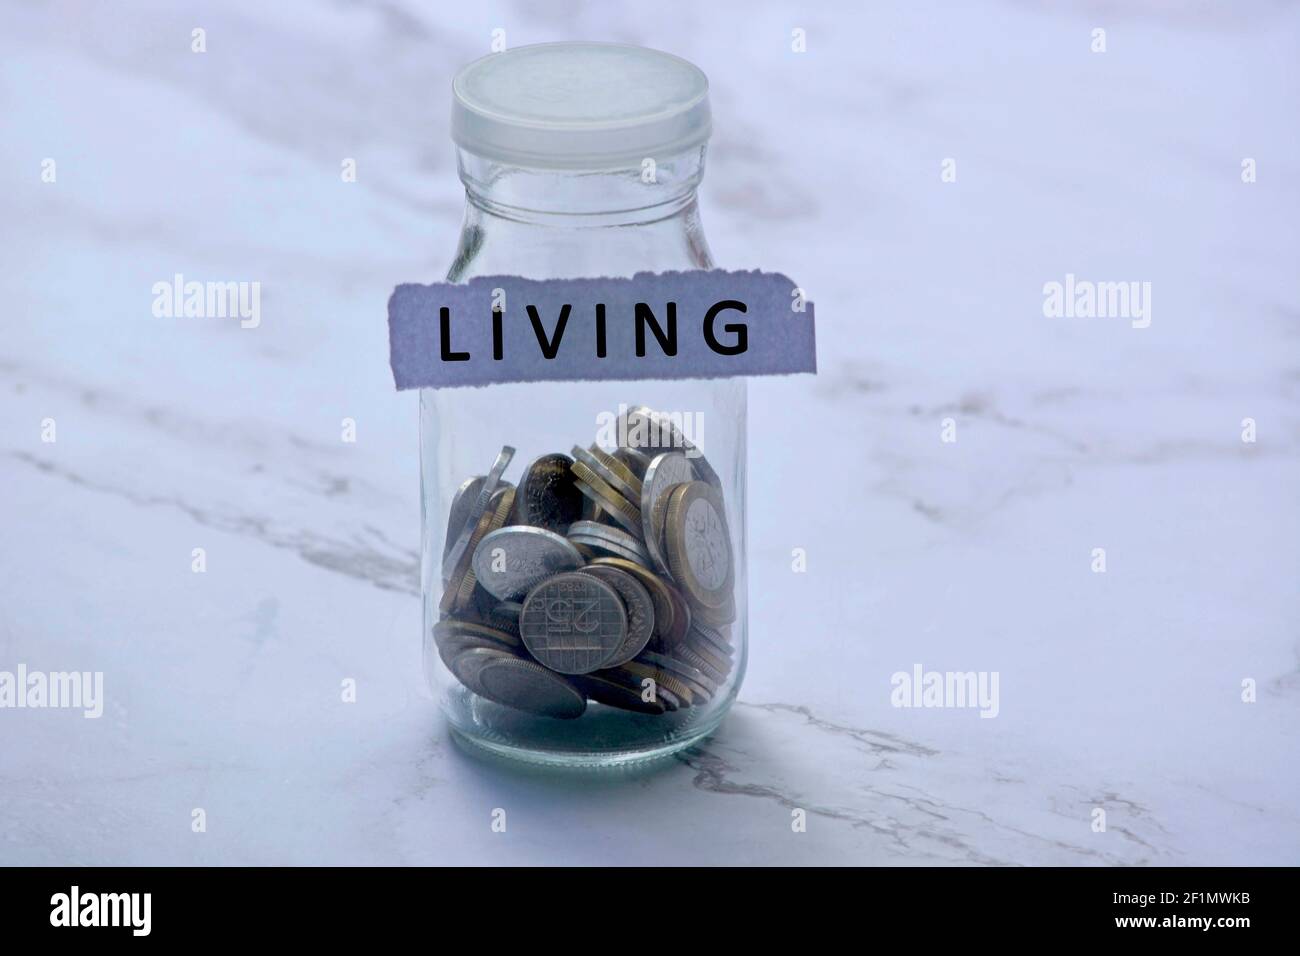 Blurred background of glass jar with multicurrency coins and text on white torn paper - Living Stock Photo